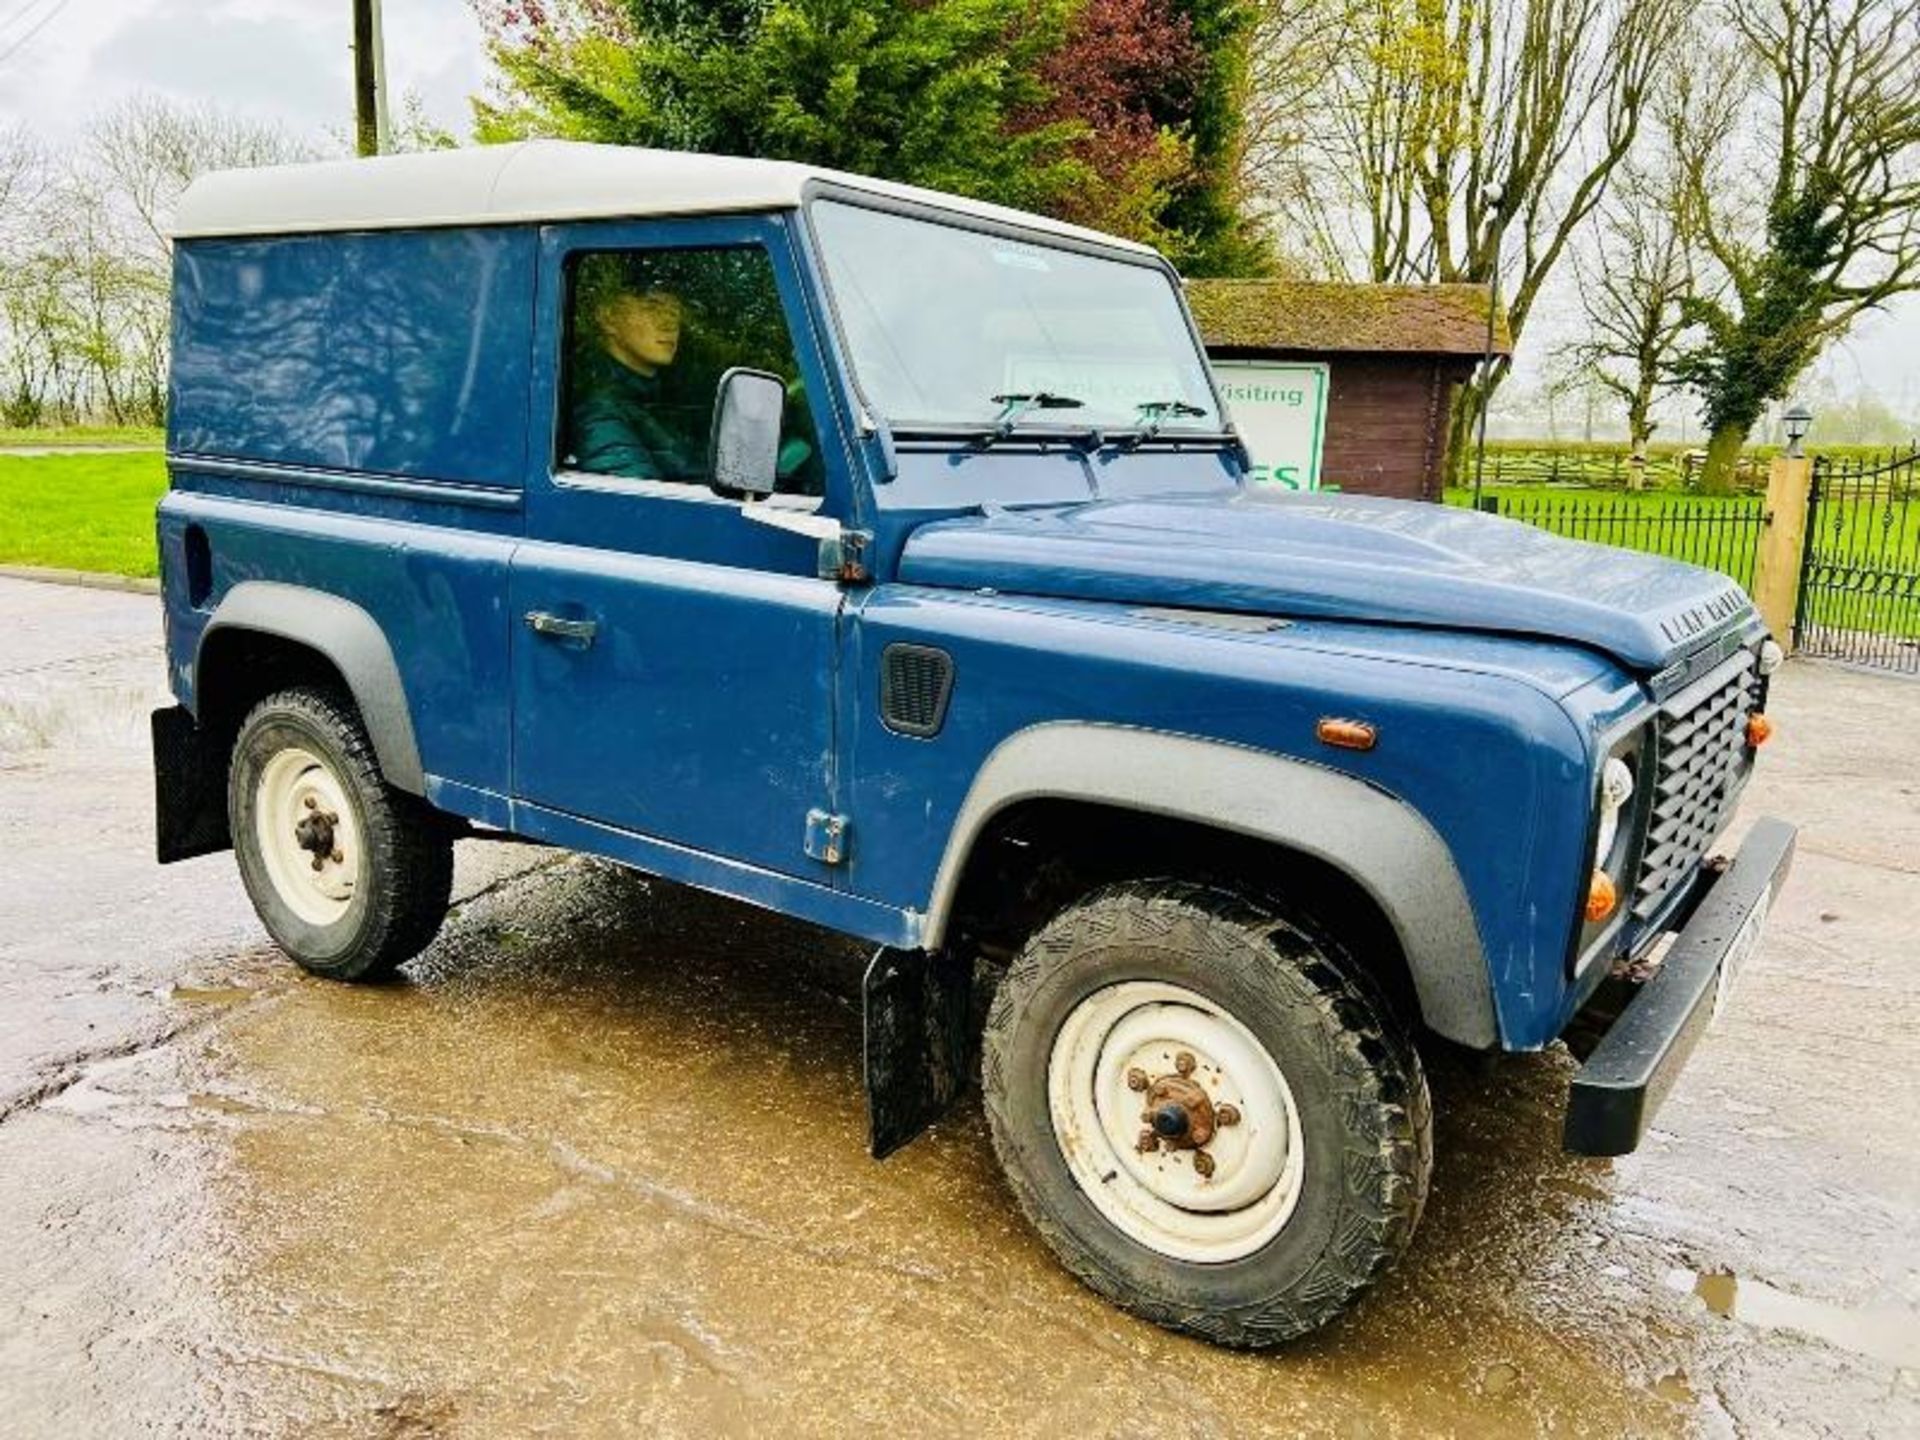 LAND ROVER DEFENDER 90 *1 OWNER FROM NEW, YEAR 2012, MOT'D TILL MARCH 2025*